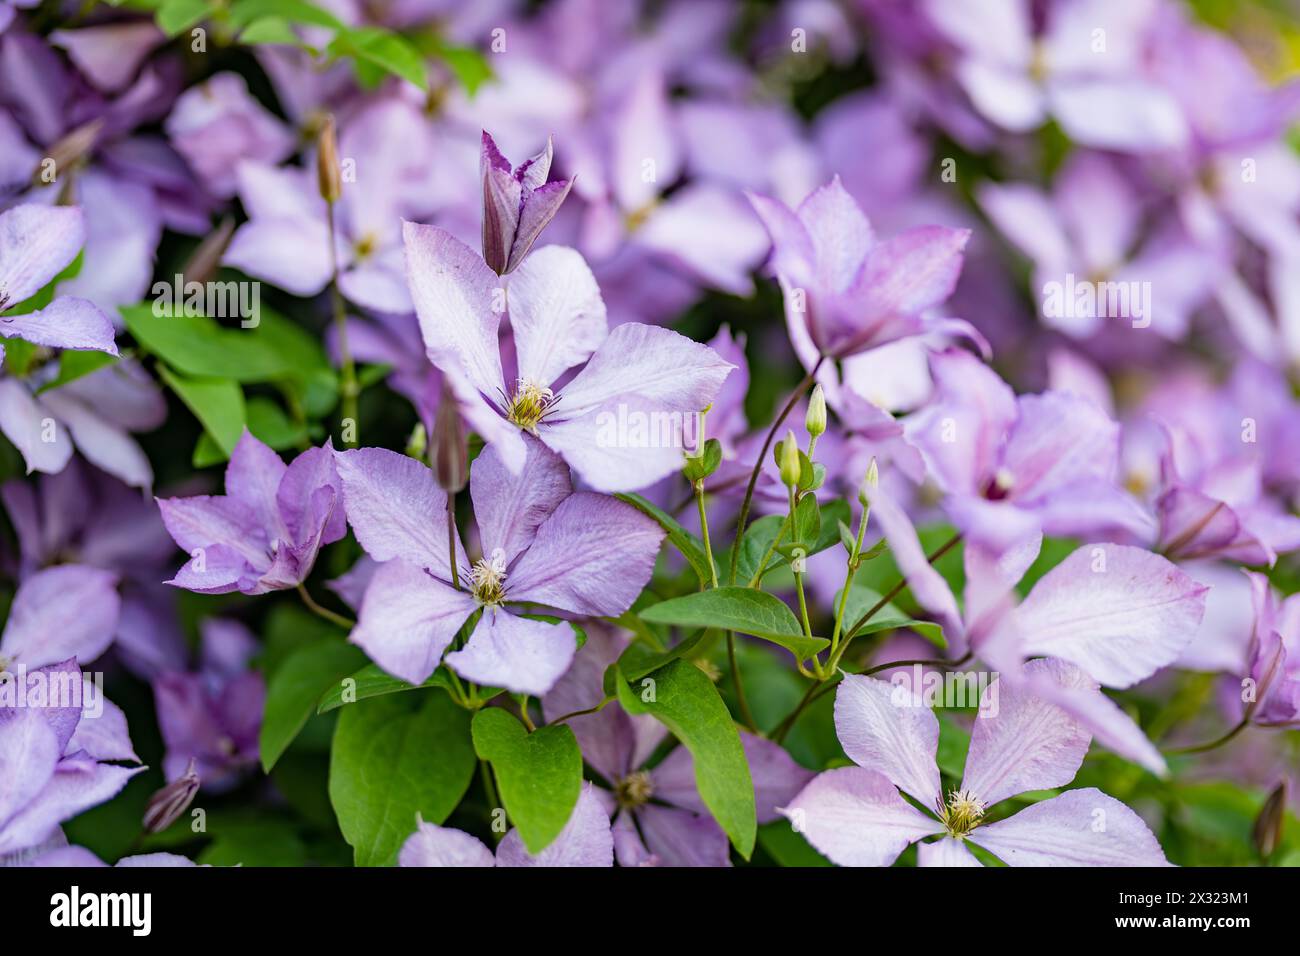 Flowering purple clematis in the garden. Flowers blossoming in summer. Beauty in nature. Stock Photo